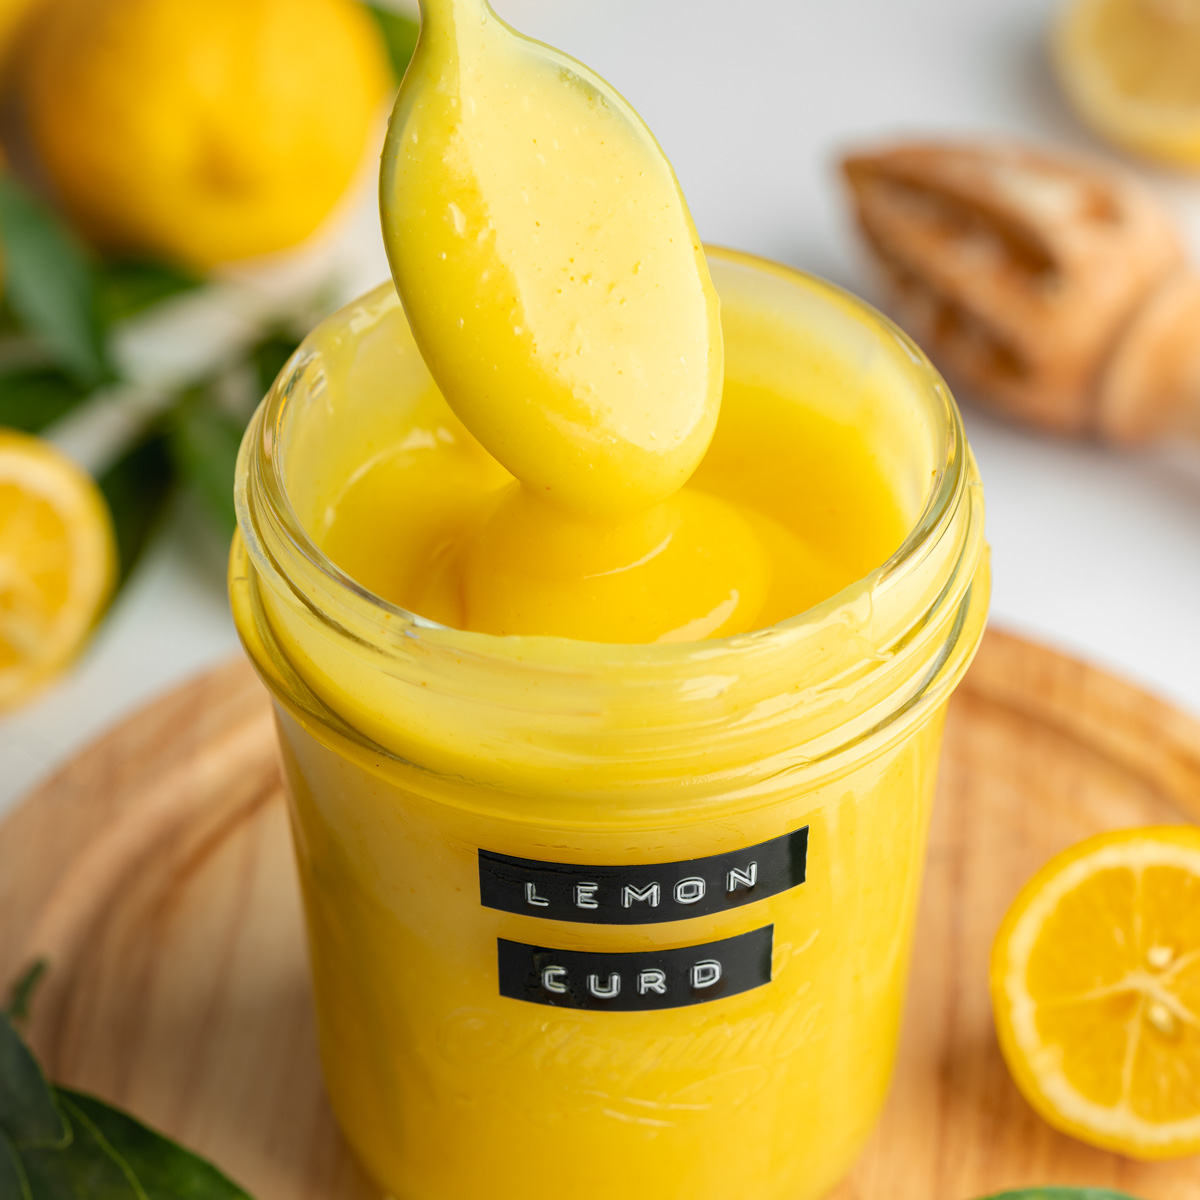 jar of lemon curd with label and lemons in the background.